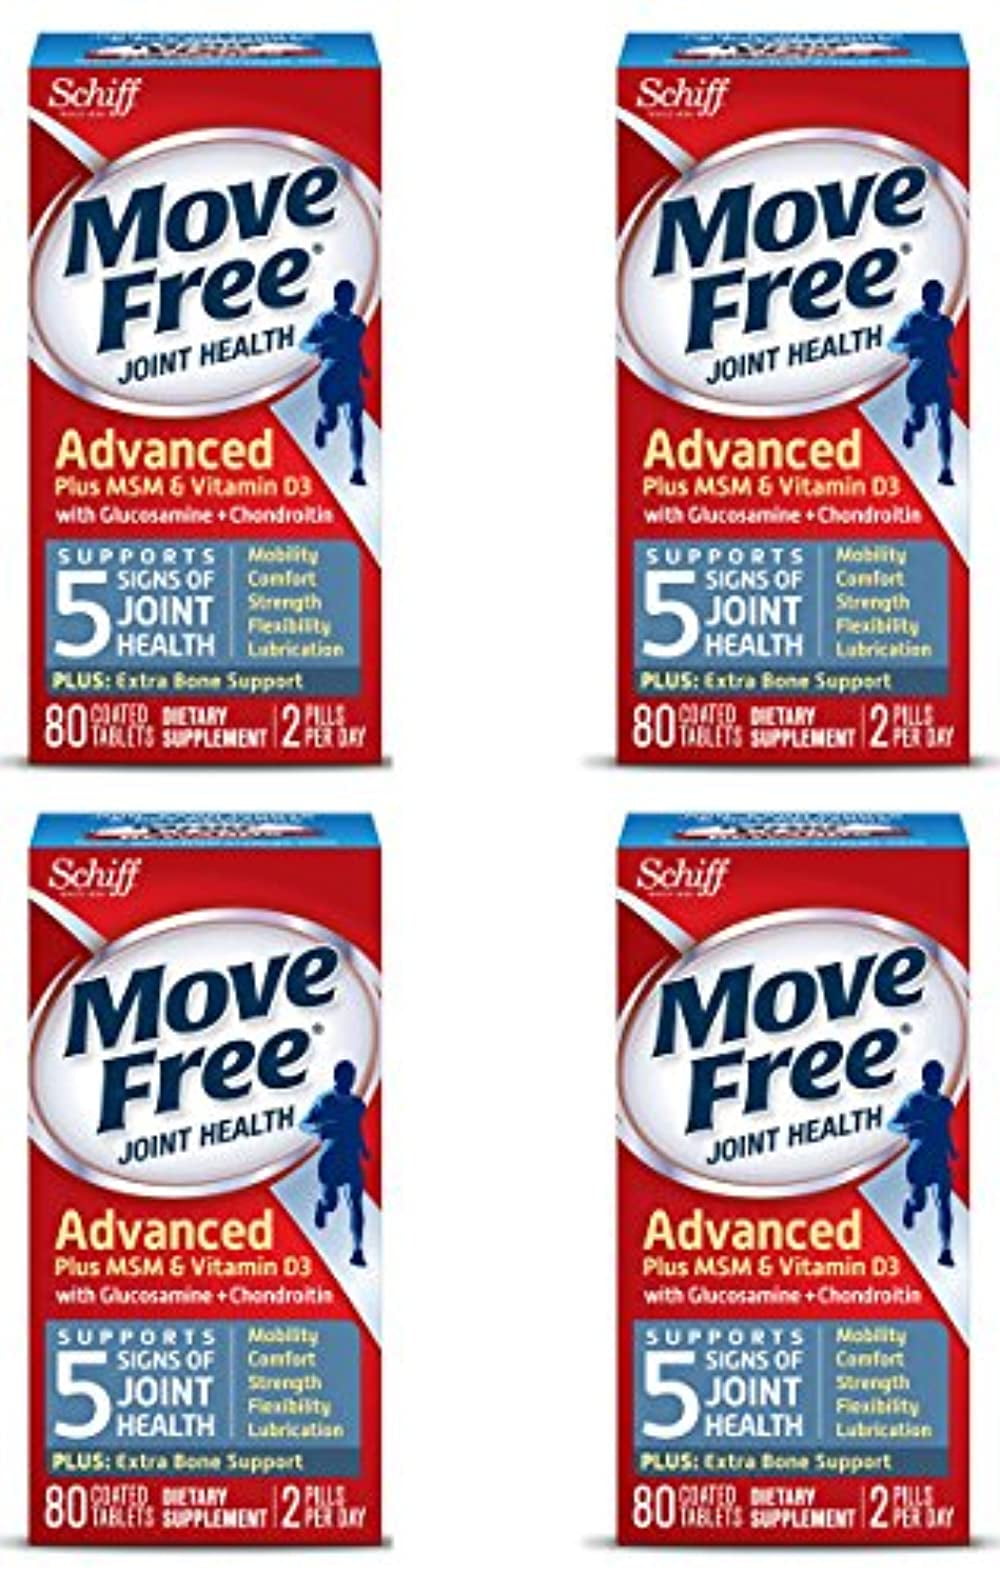  Move Free Advanced Glucosamine Chondroitin MSM + Vitamin D3  Joint Support Supplement, Supports Mobility Comfort Strength Flexibility &  Bone + Immune Health - Tablet, 3x120ct Bottles (120 servings)* : Health &  Household